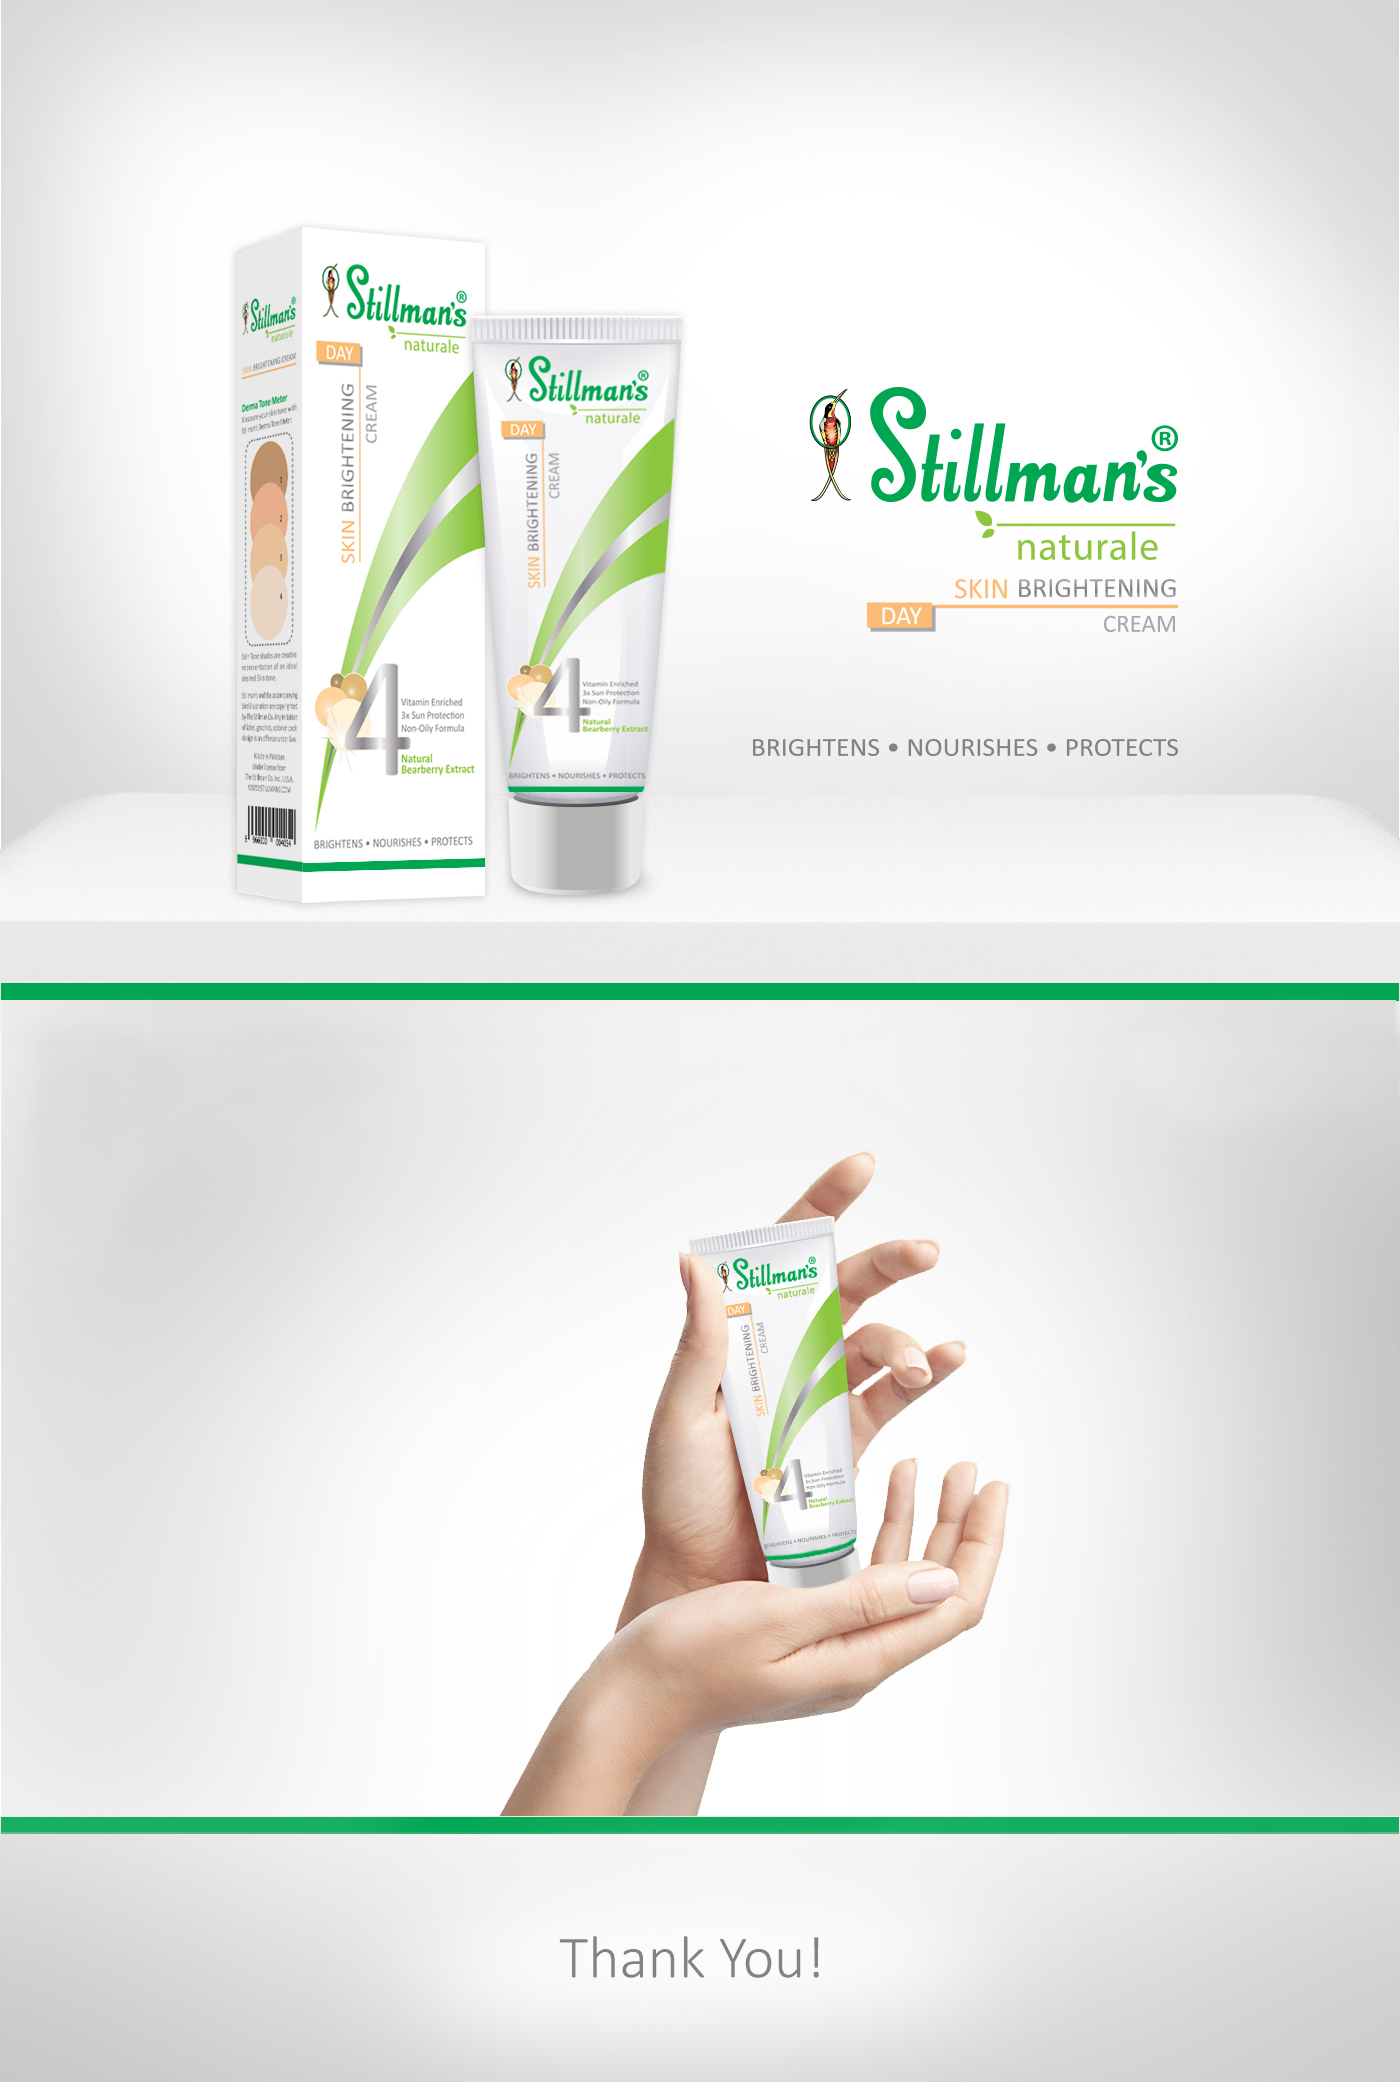 Beauty Product Pacakging packaging design Stillman's day cream product packaging ILLUSTRATION  skin care products